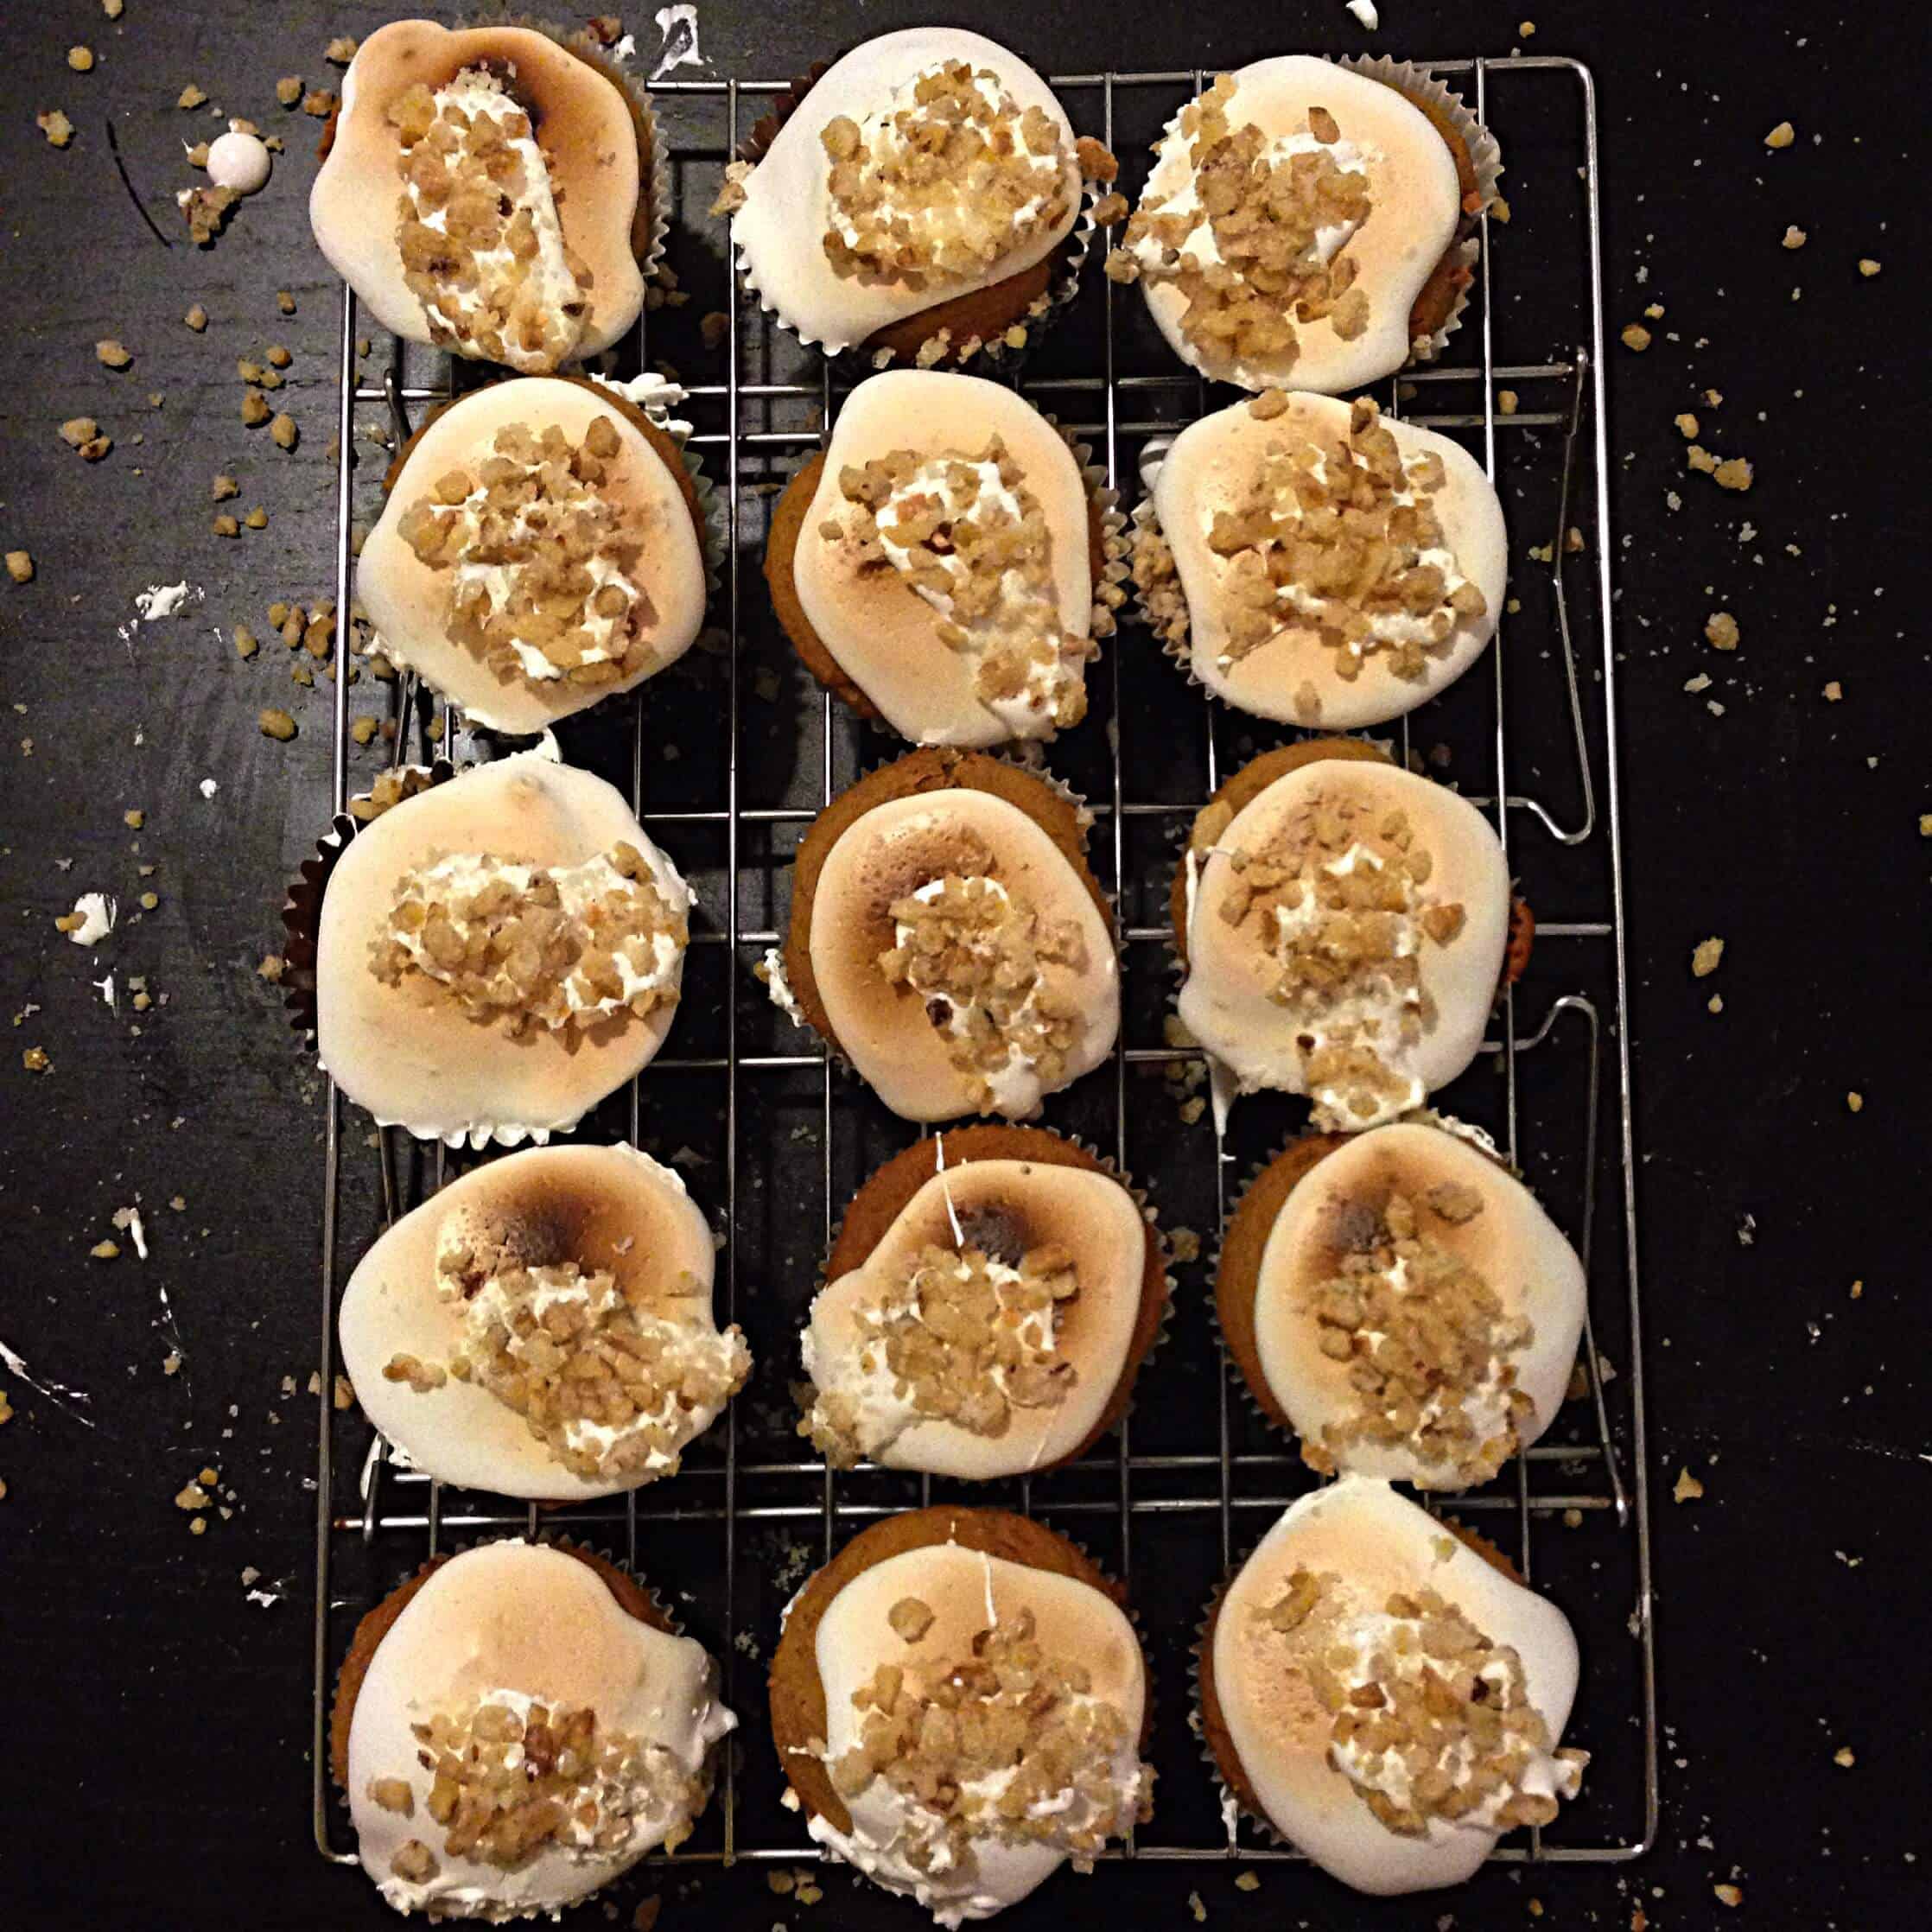 image of sweet potato cupcakes topped with toasted meringue and toasted nuts